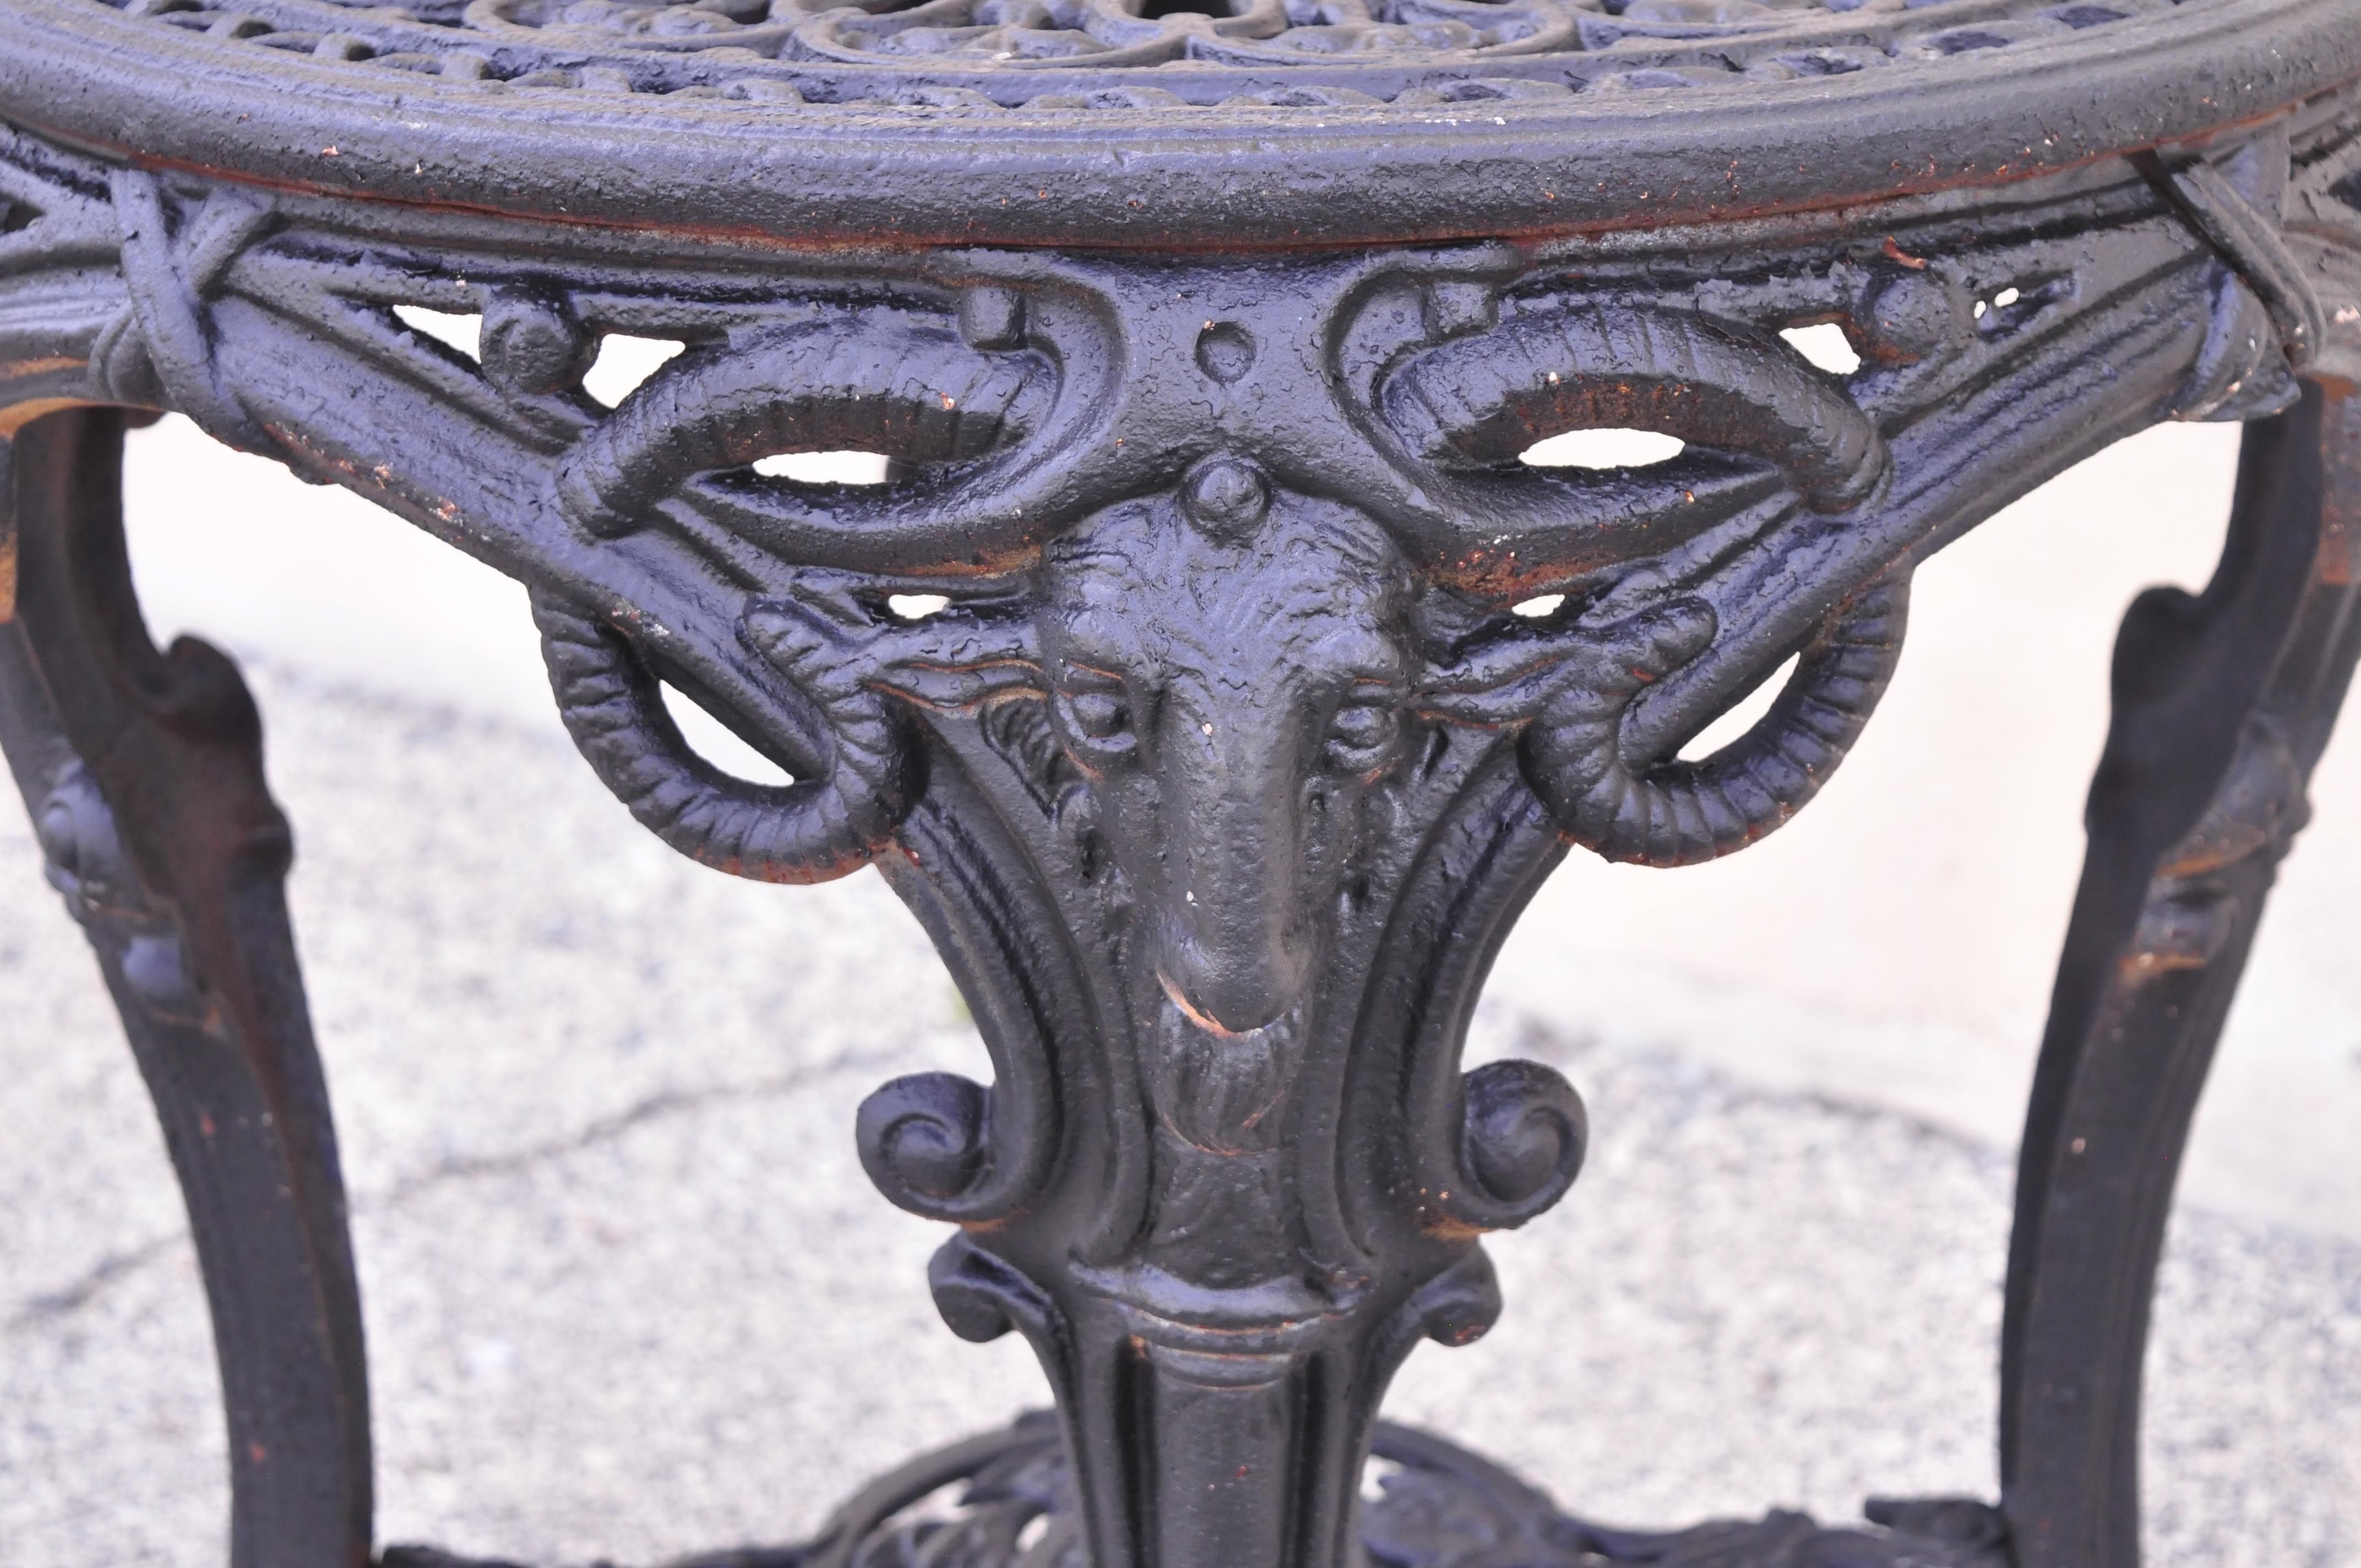 Antique English Victorian Regency cast iron round pub center table with rams heads. Item features rams heads and hoof feet, pierced design to top and lower shelf, black painted finish, cast iron construction, very nice antique item. Approx. 80 lbs.